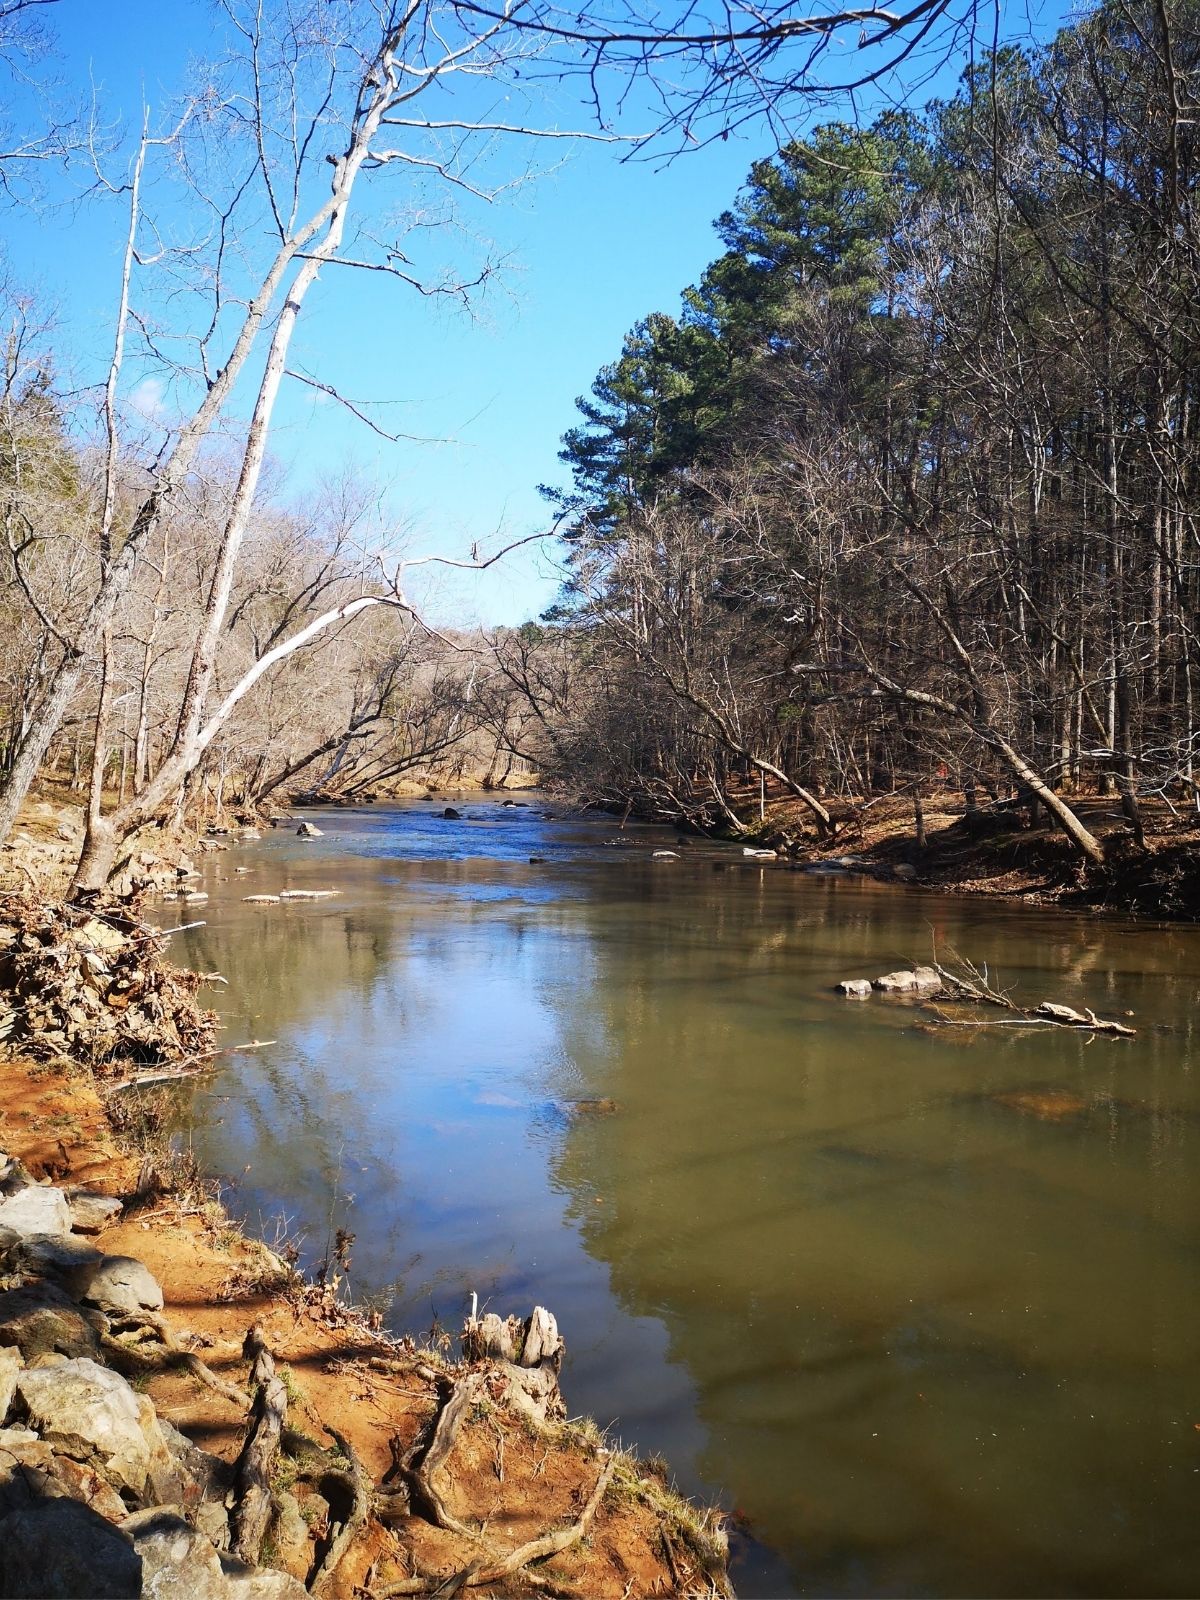 A view of Eno River from the riverbank. On either side are bare trees and there are a few rocks in the river. 